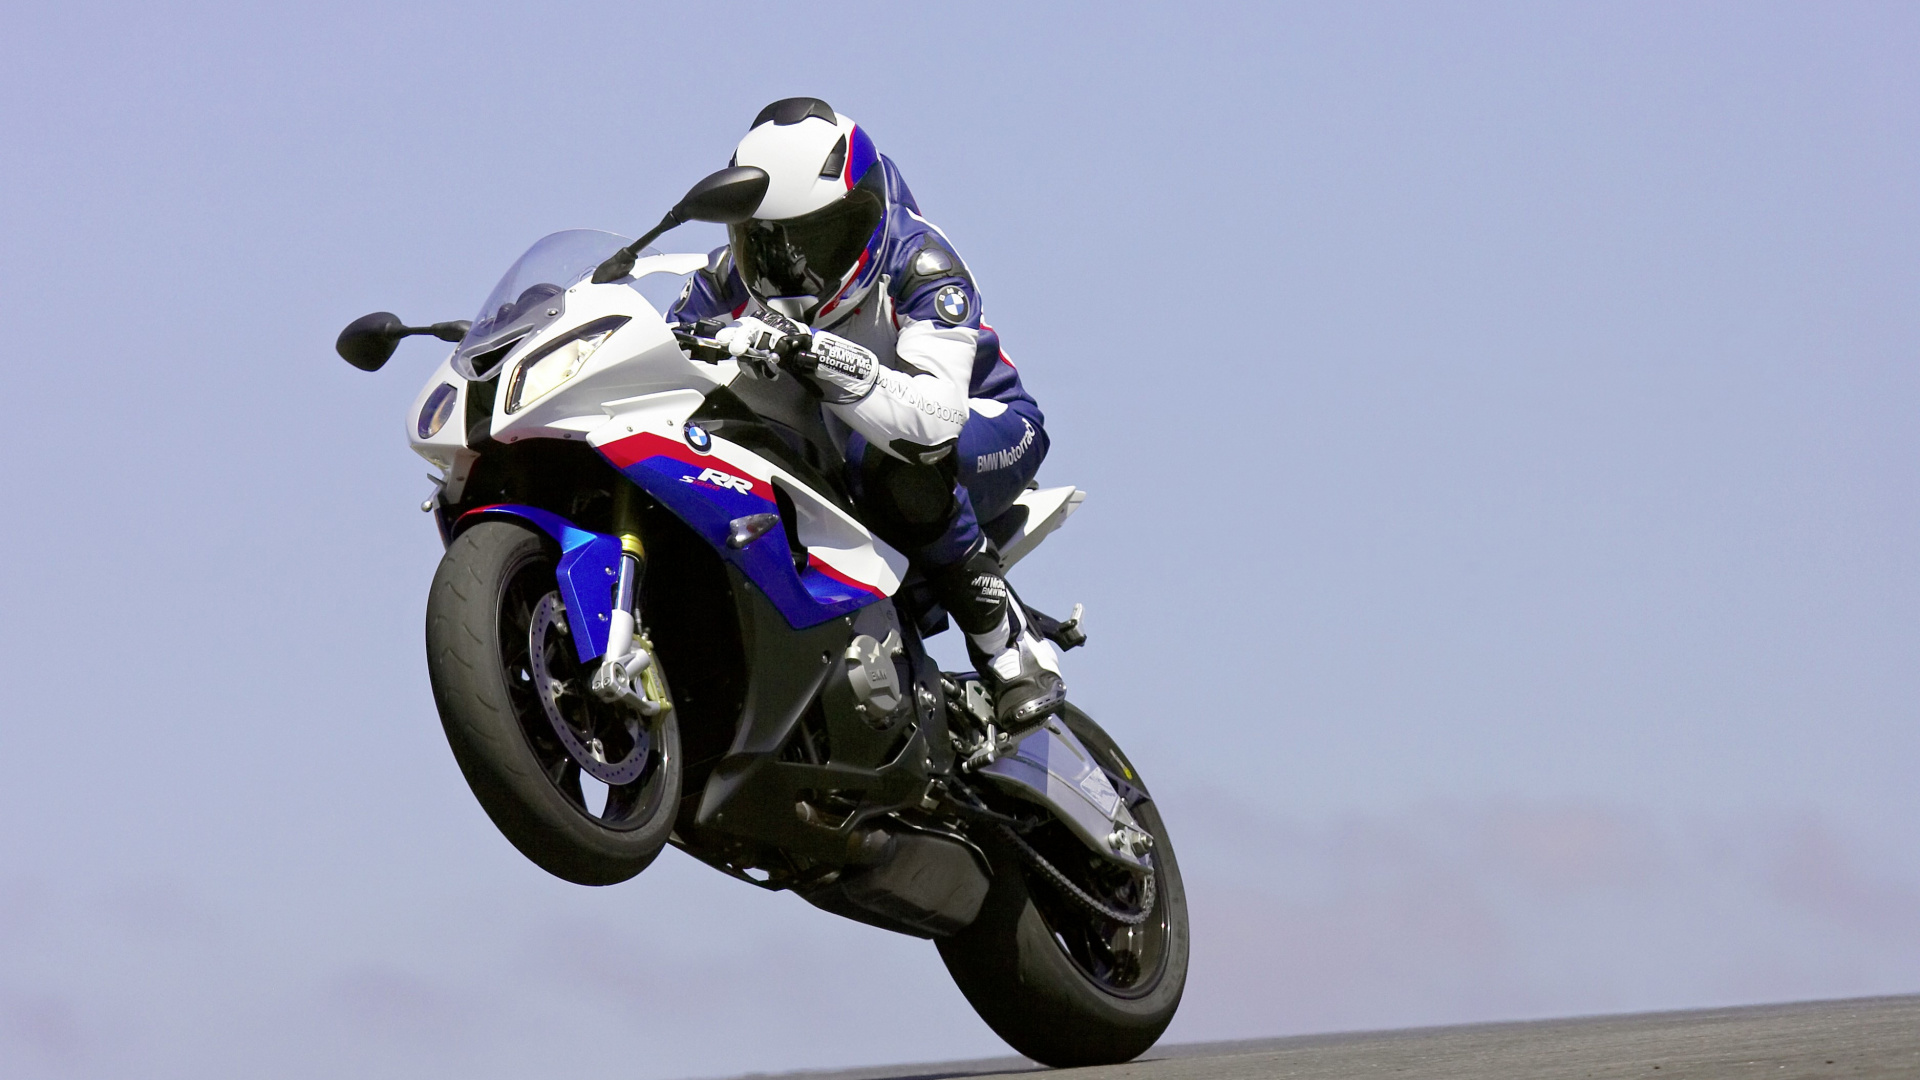 Man in White and Black Motorcycle Helmet Riding White and Black Sports Bike. Wallpaper in 1920x1080 Resolution